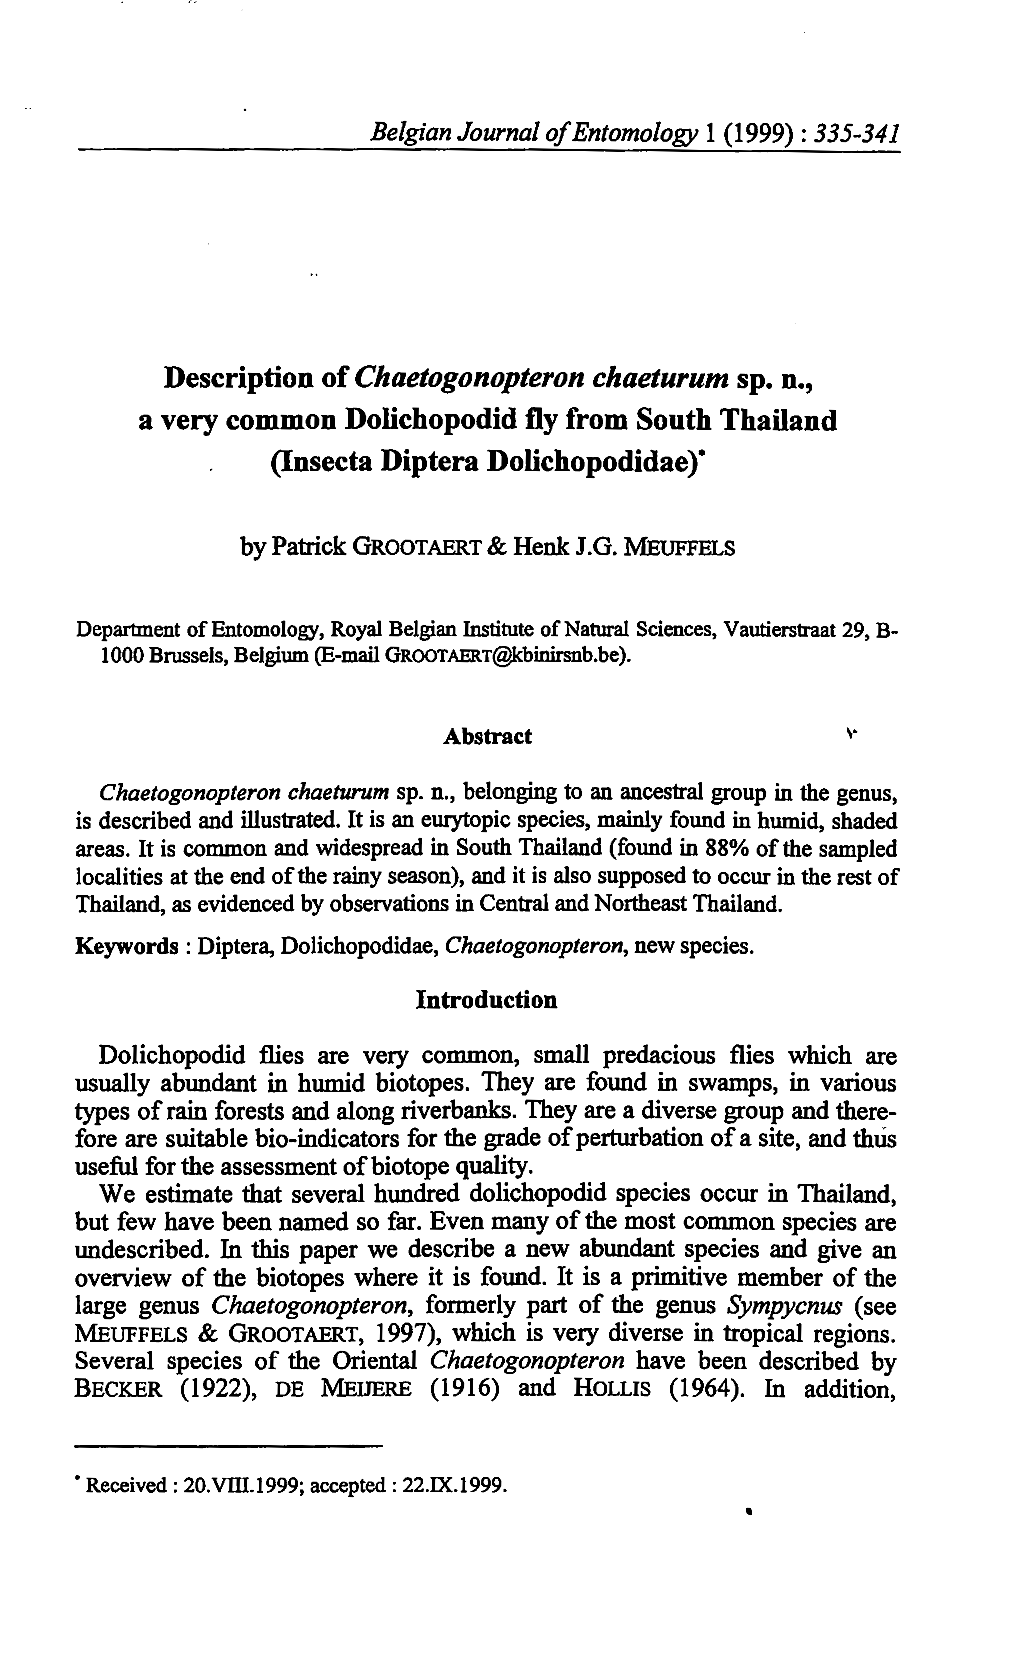 Description of Chaetogonopteron Chaeturum Sp. N., a Very Common Dolichopodid Fly from South Thailand (Insecta Diptera Dolichopodidae)*